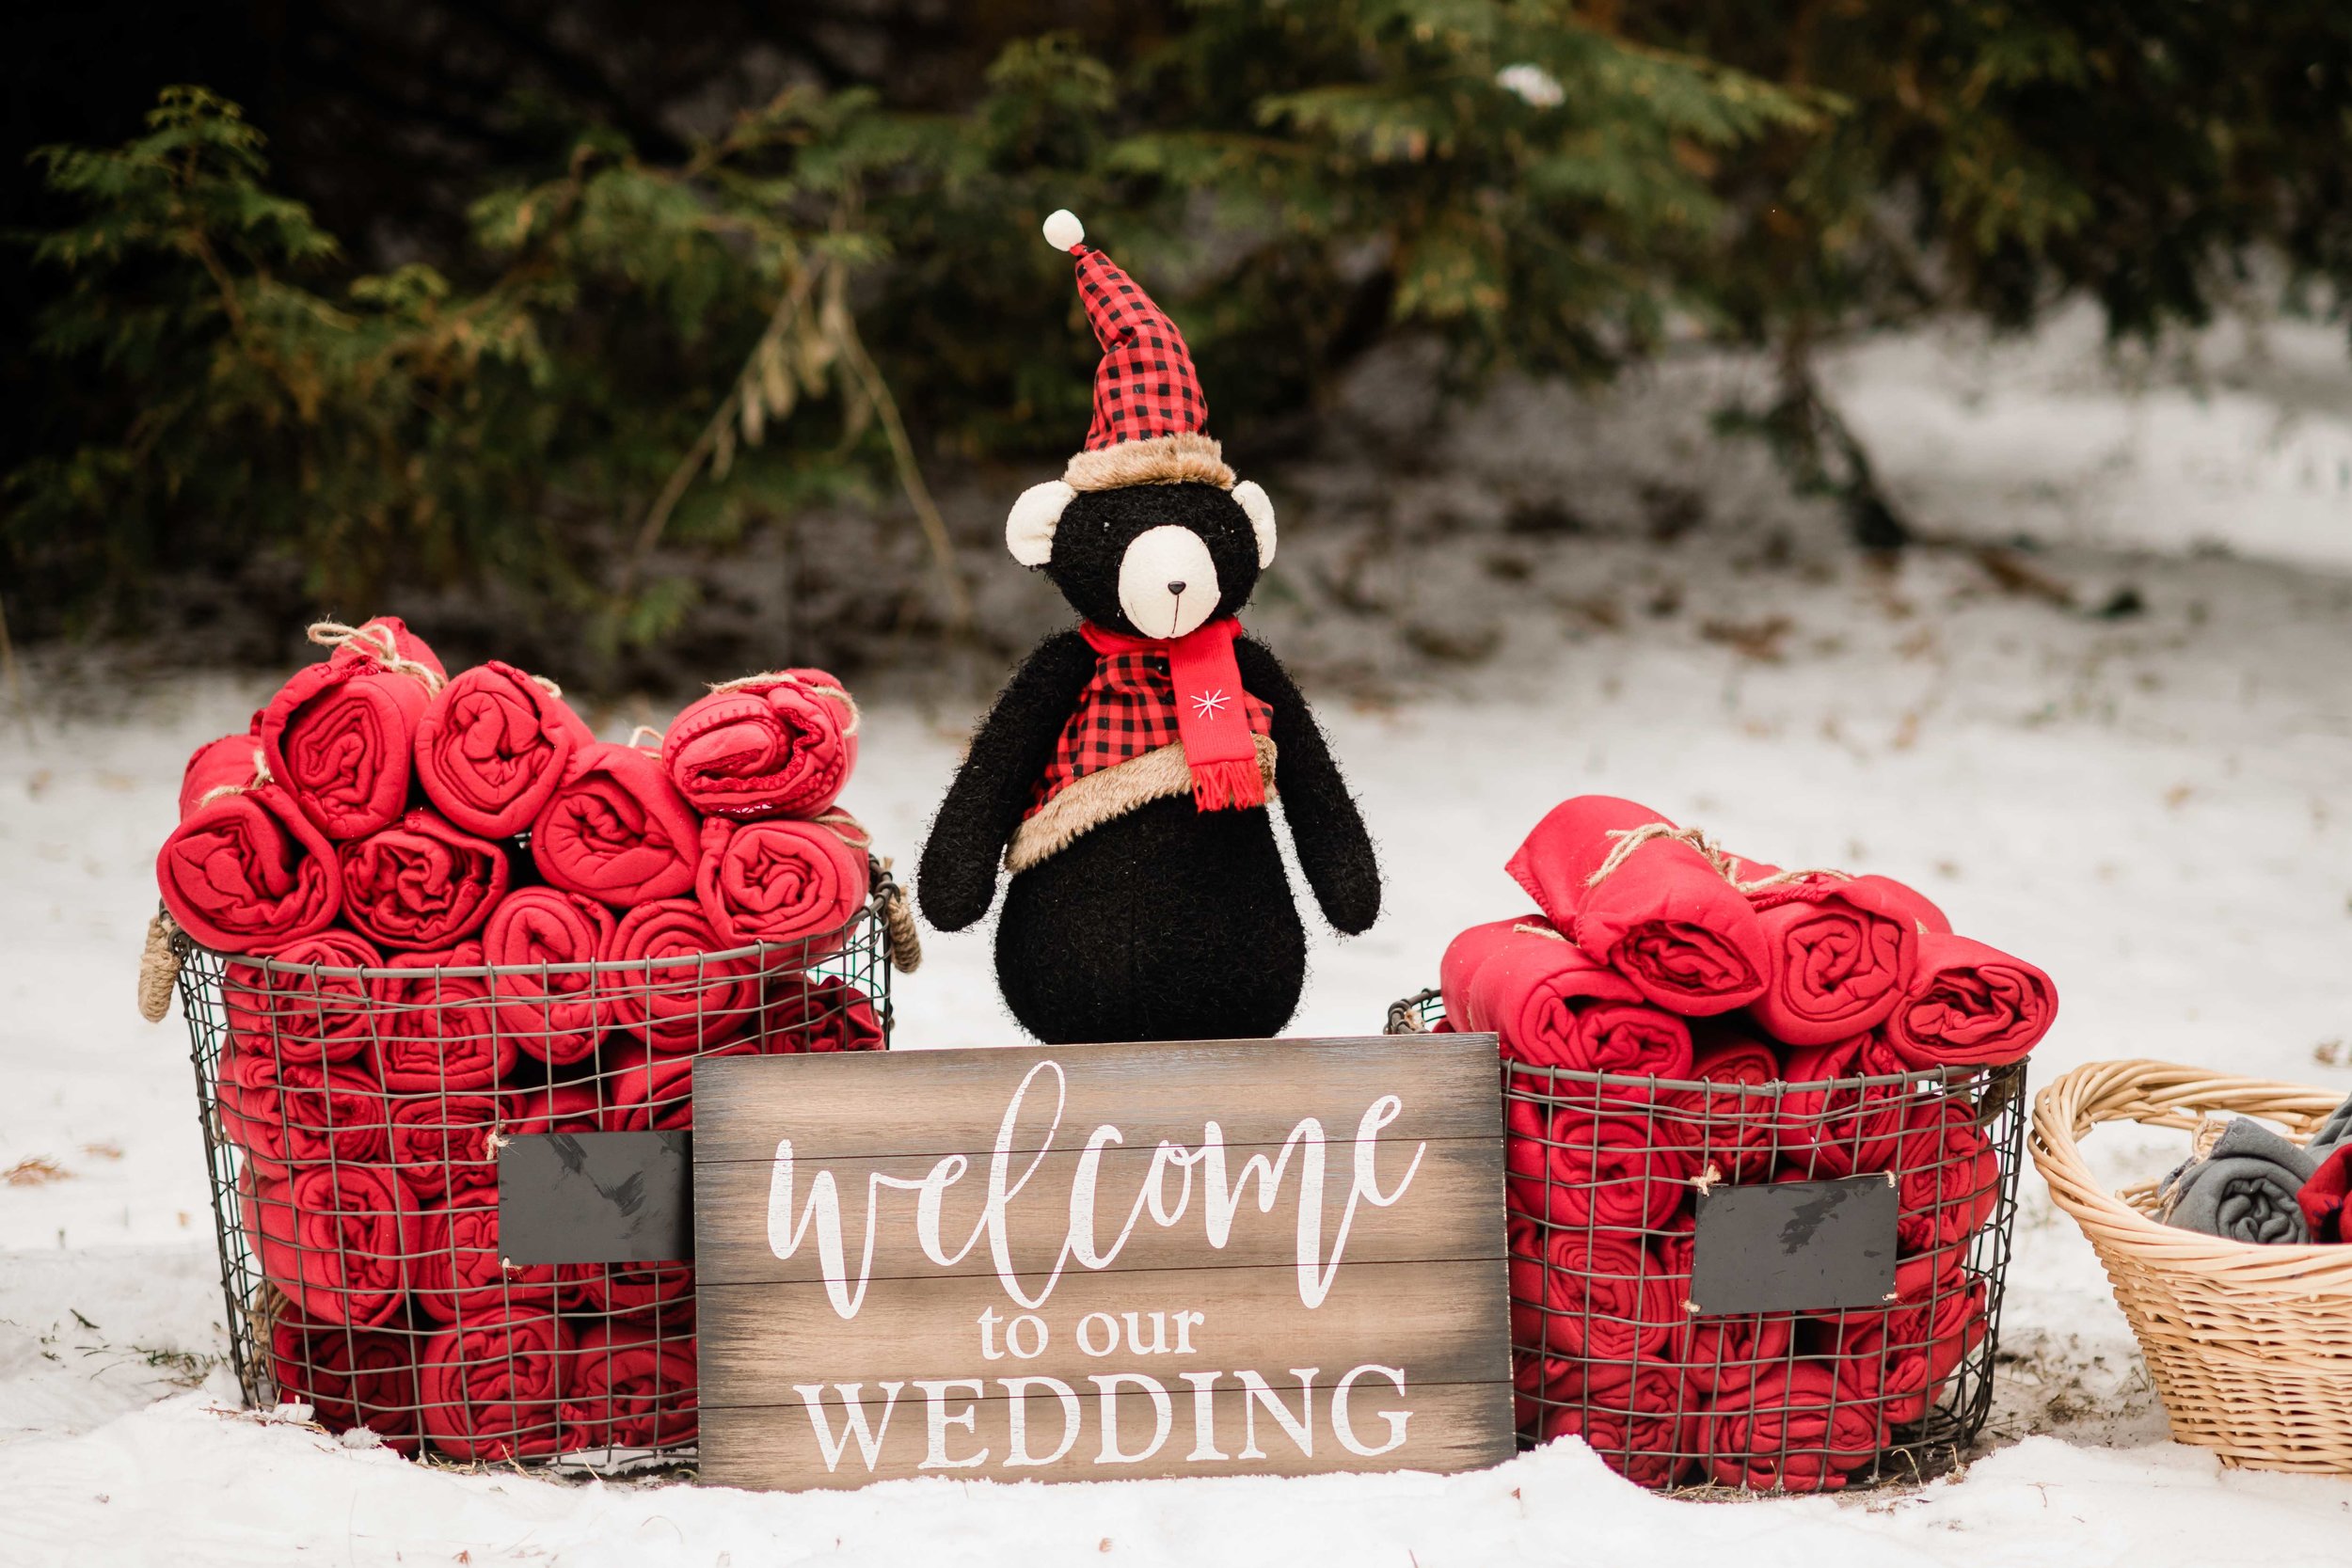 Welcome to our wedding sign and blankets for outdoor winter wedding